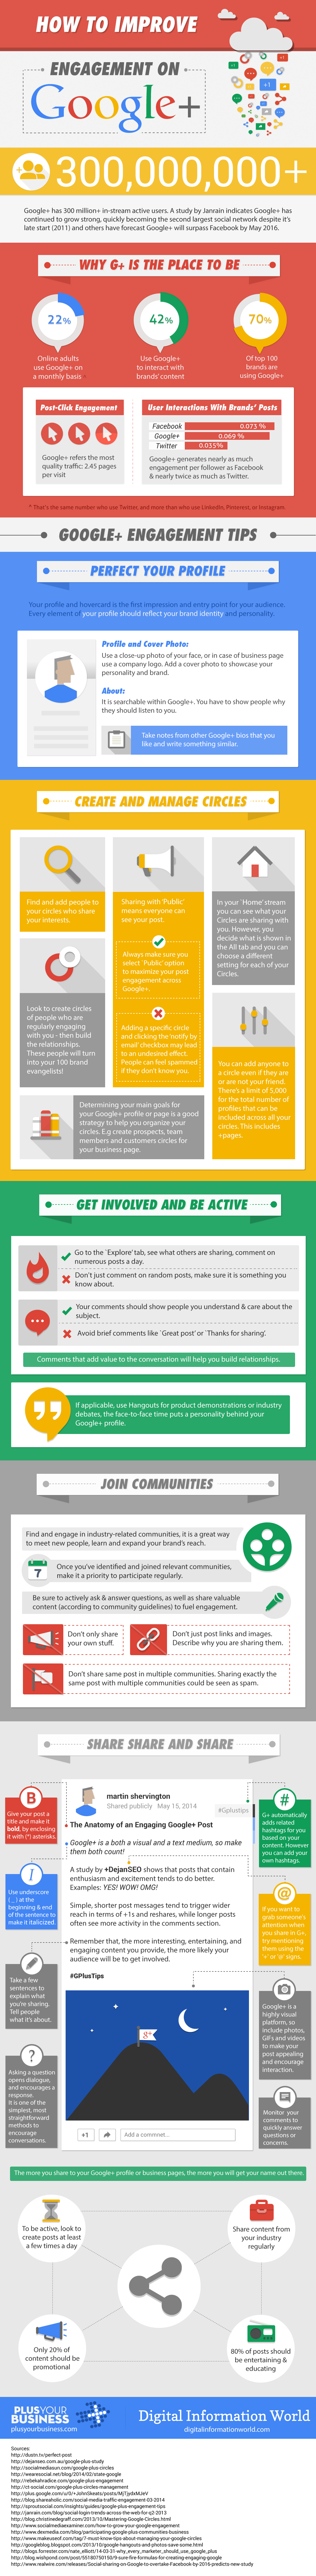 How to Improve Your Engagement on Google Plus